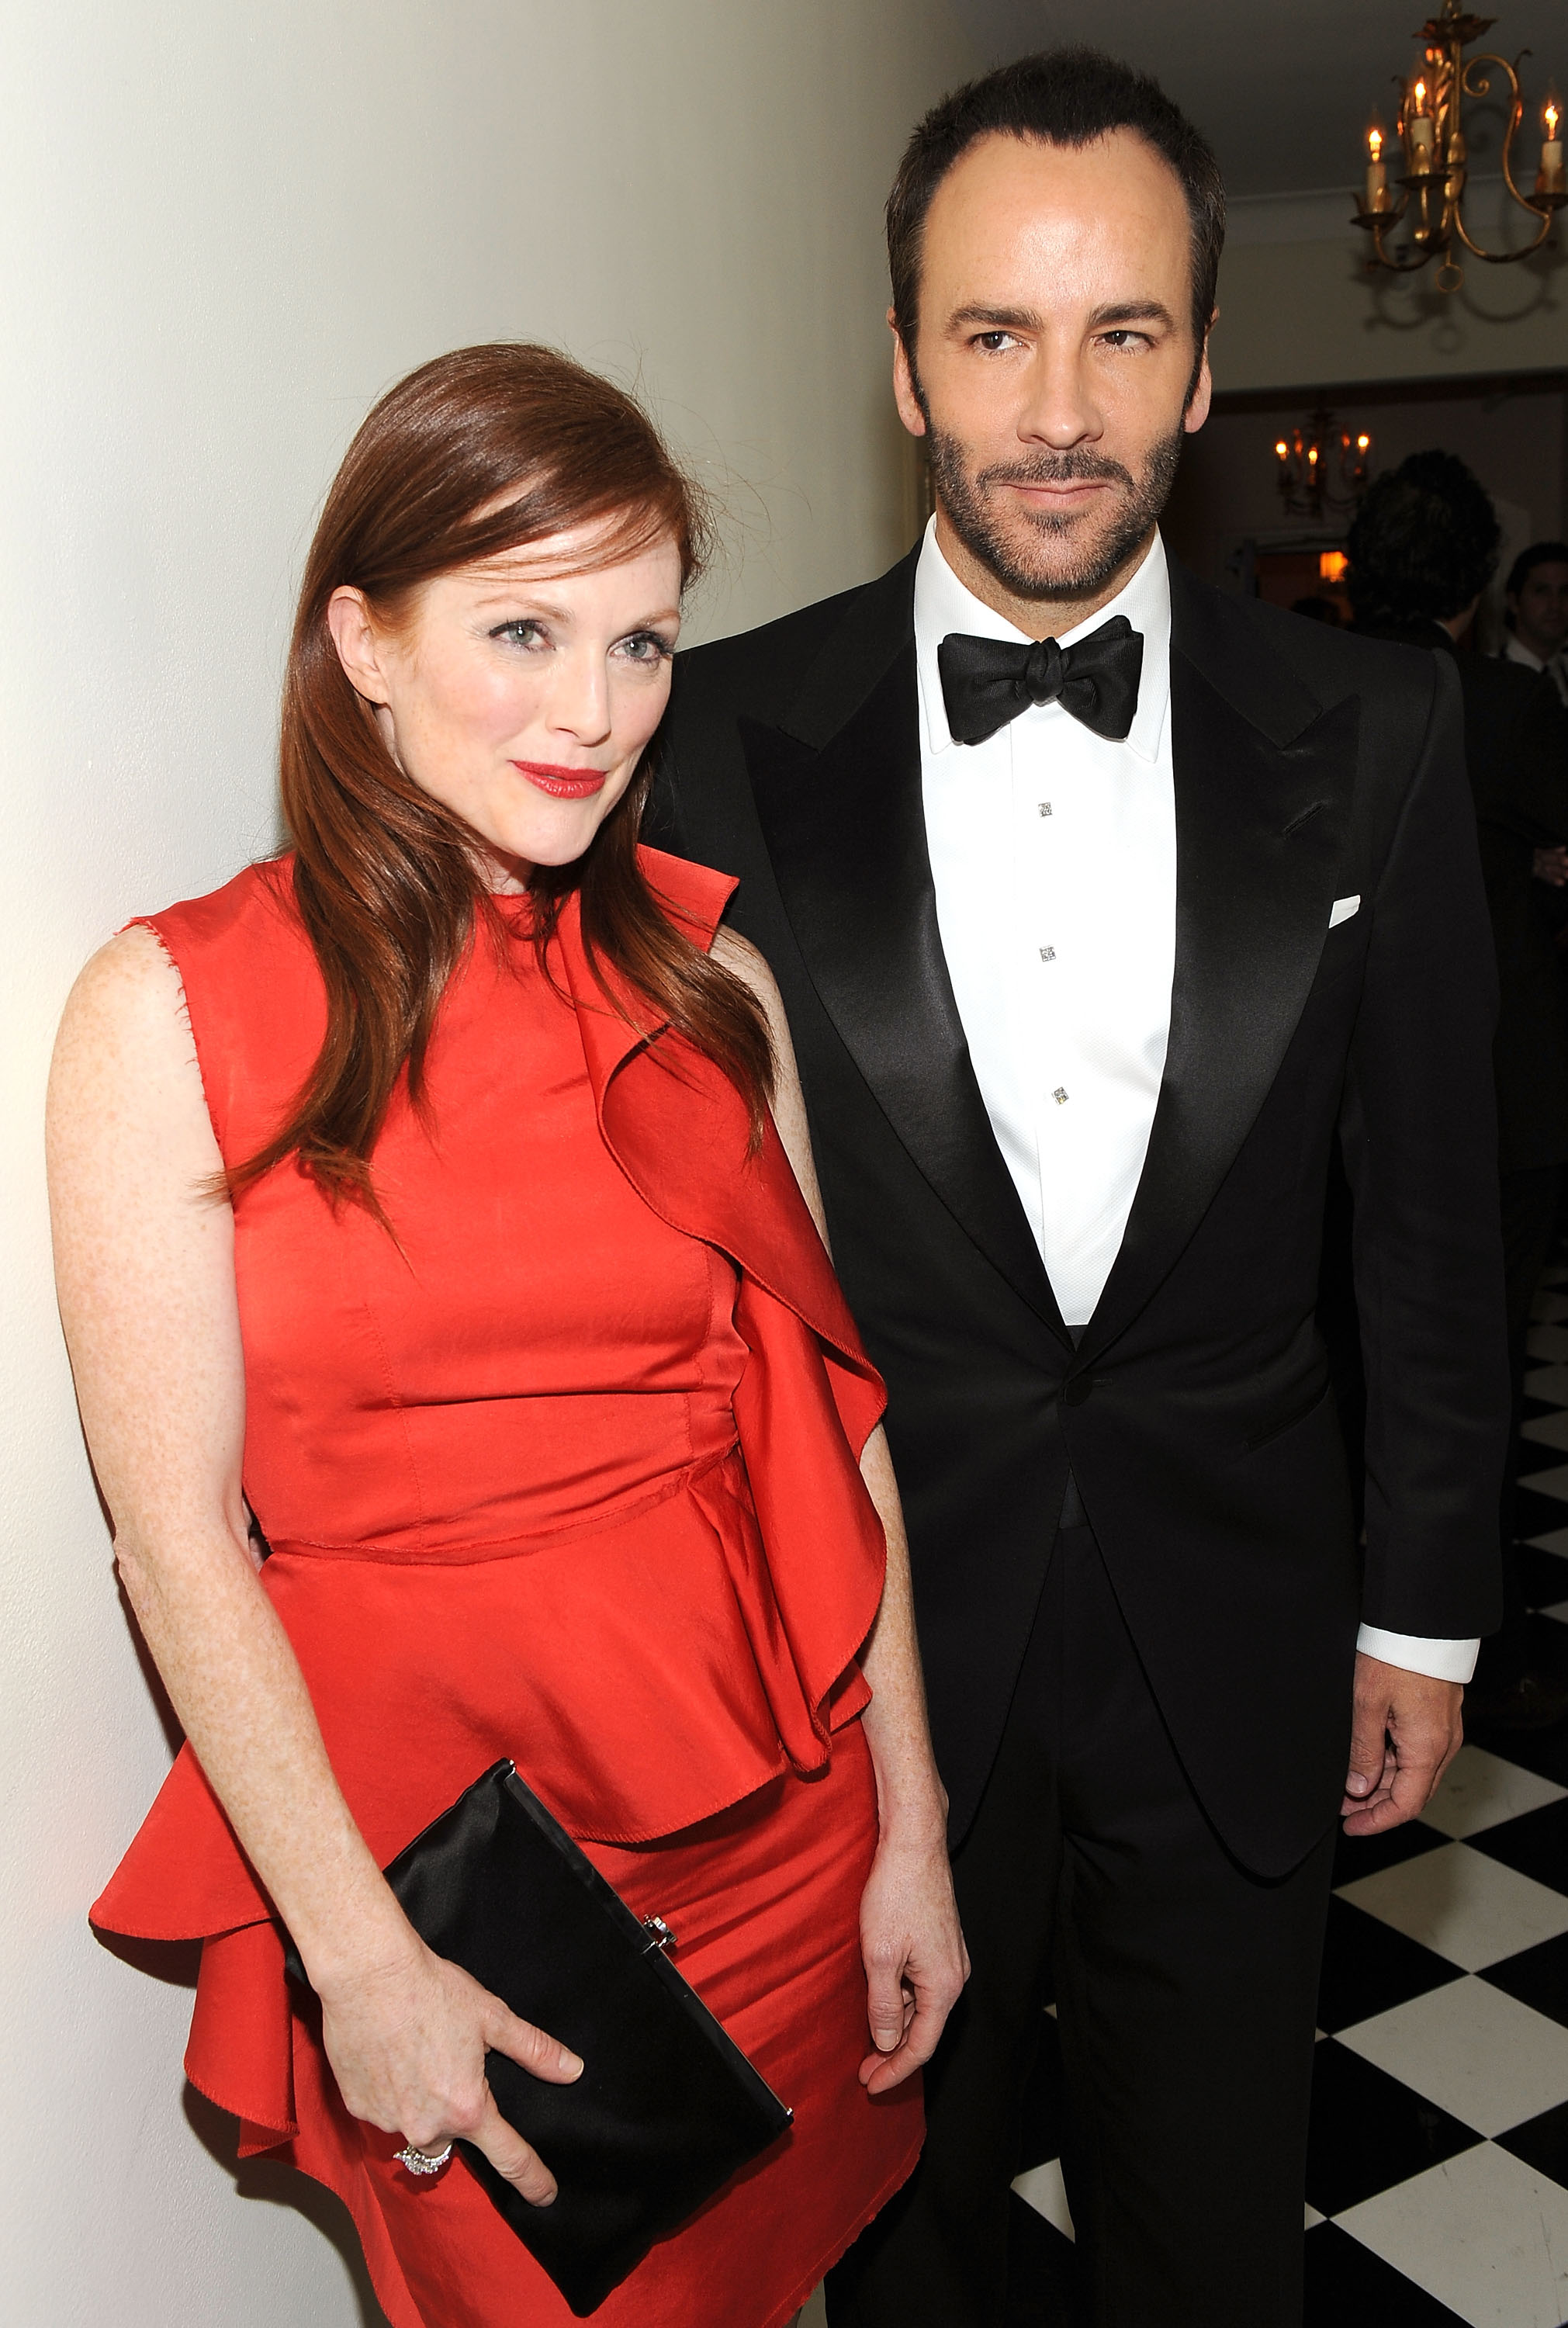 Will Julianne Moore Wear Tom Ford to The Oscars?